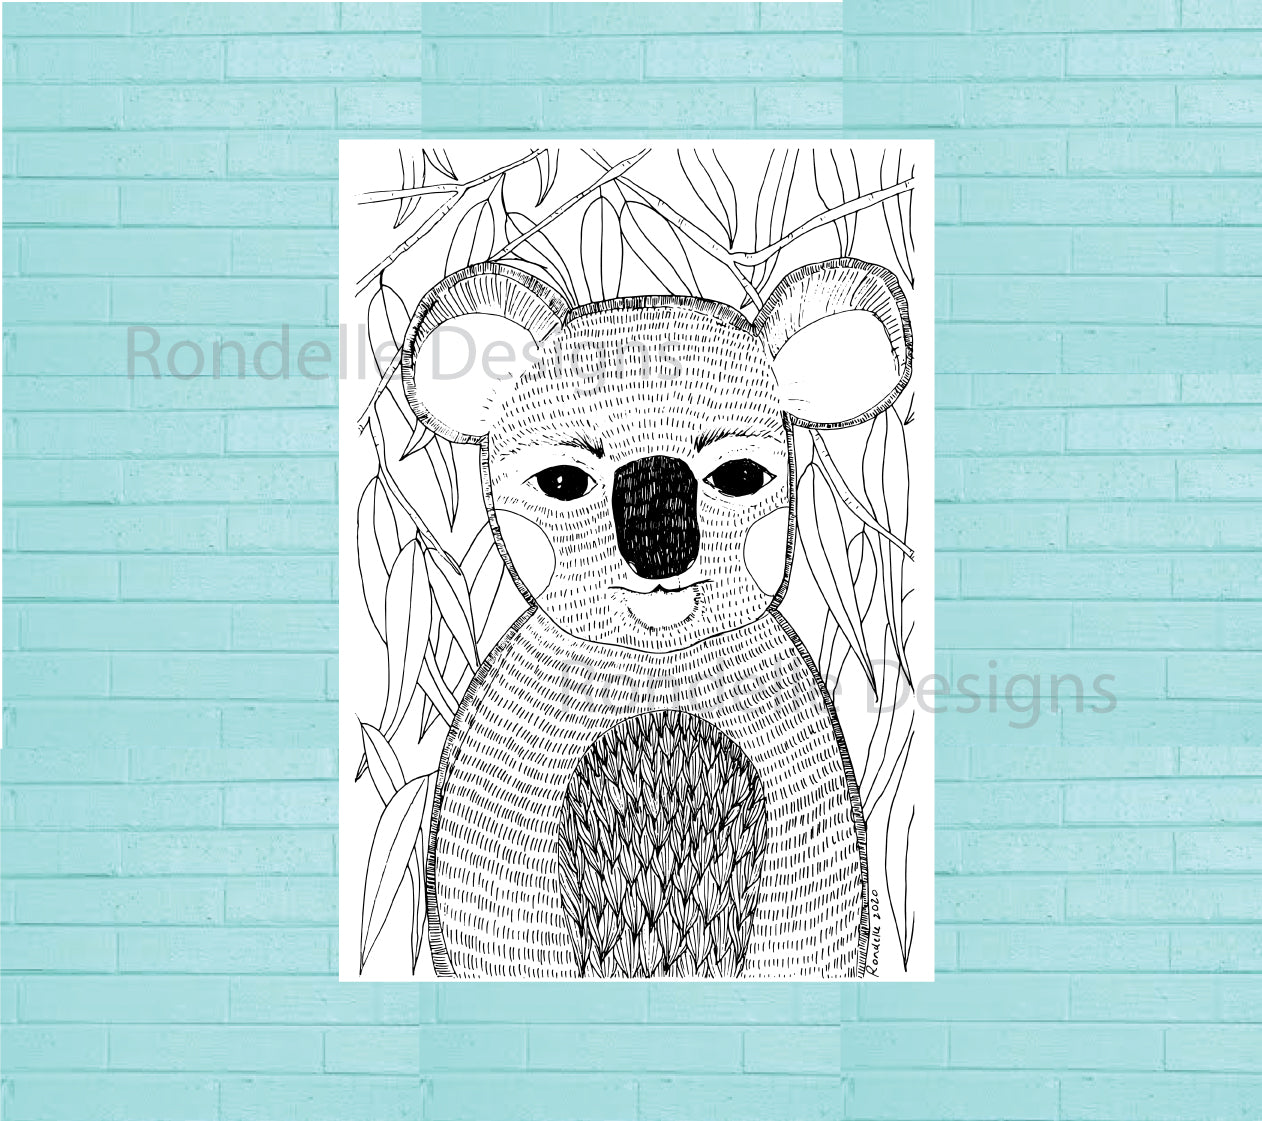 Colouring In Poster / Instant Digital Download A1 Printable Poster / Clarence the Koala Design